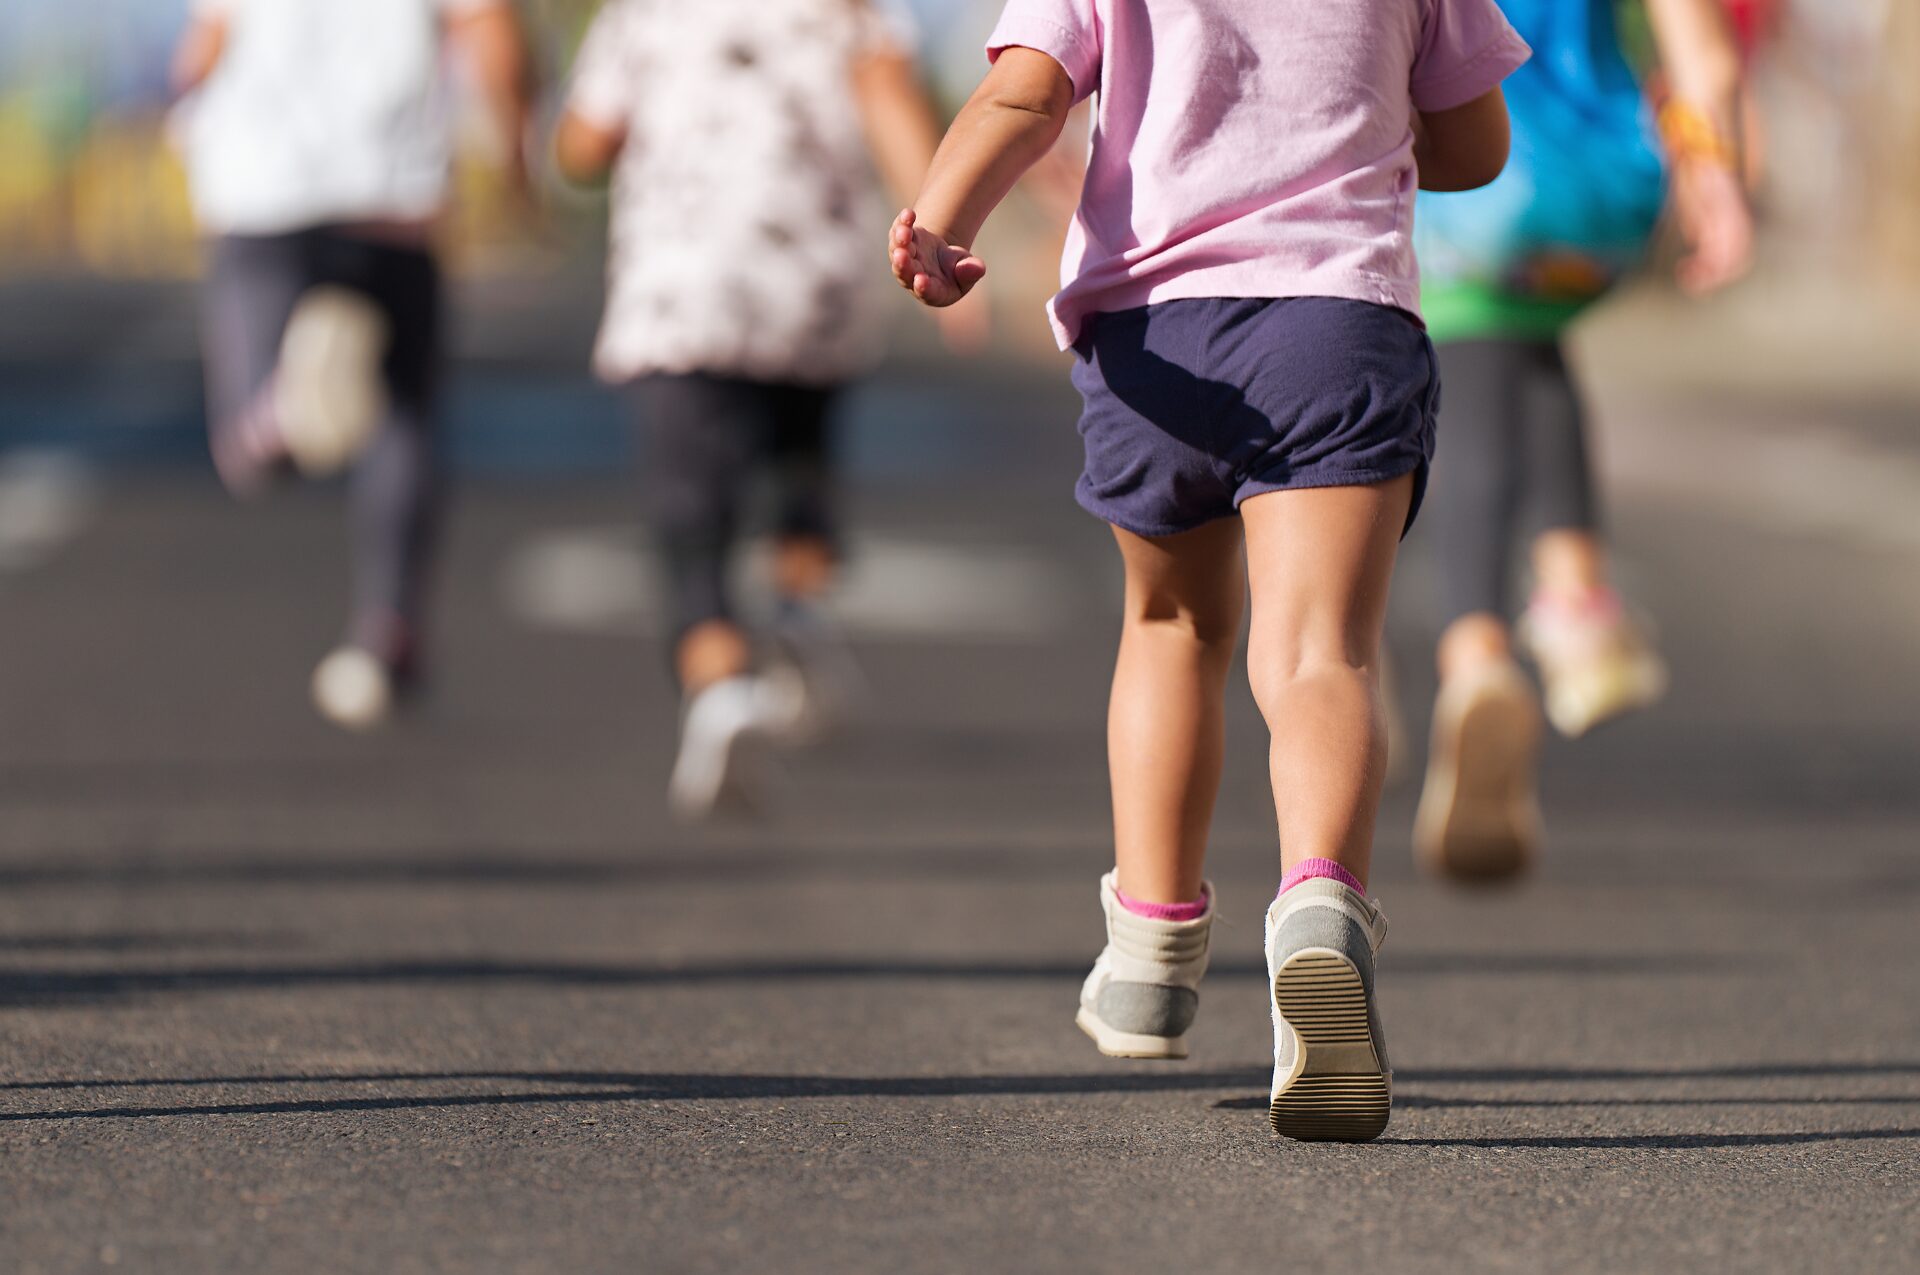 Healthy Habits for Lifelong Running: Why kids should keep running.